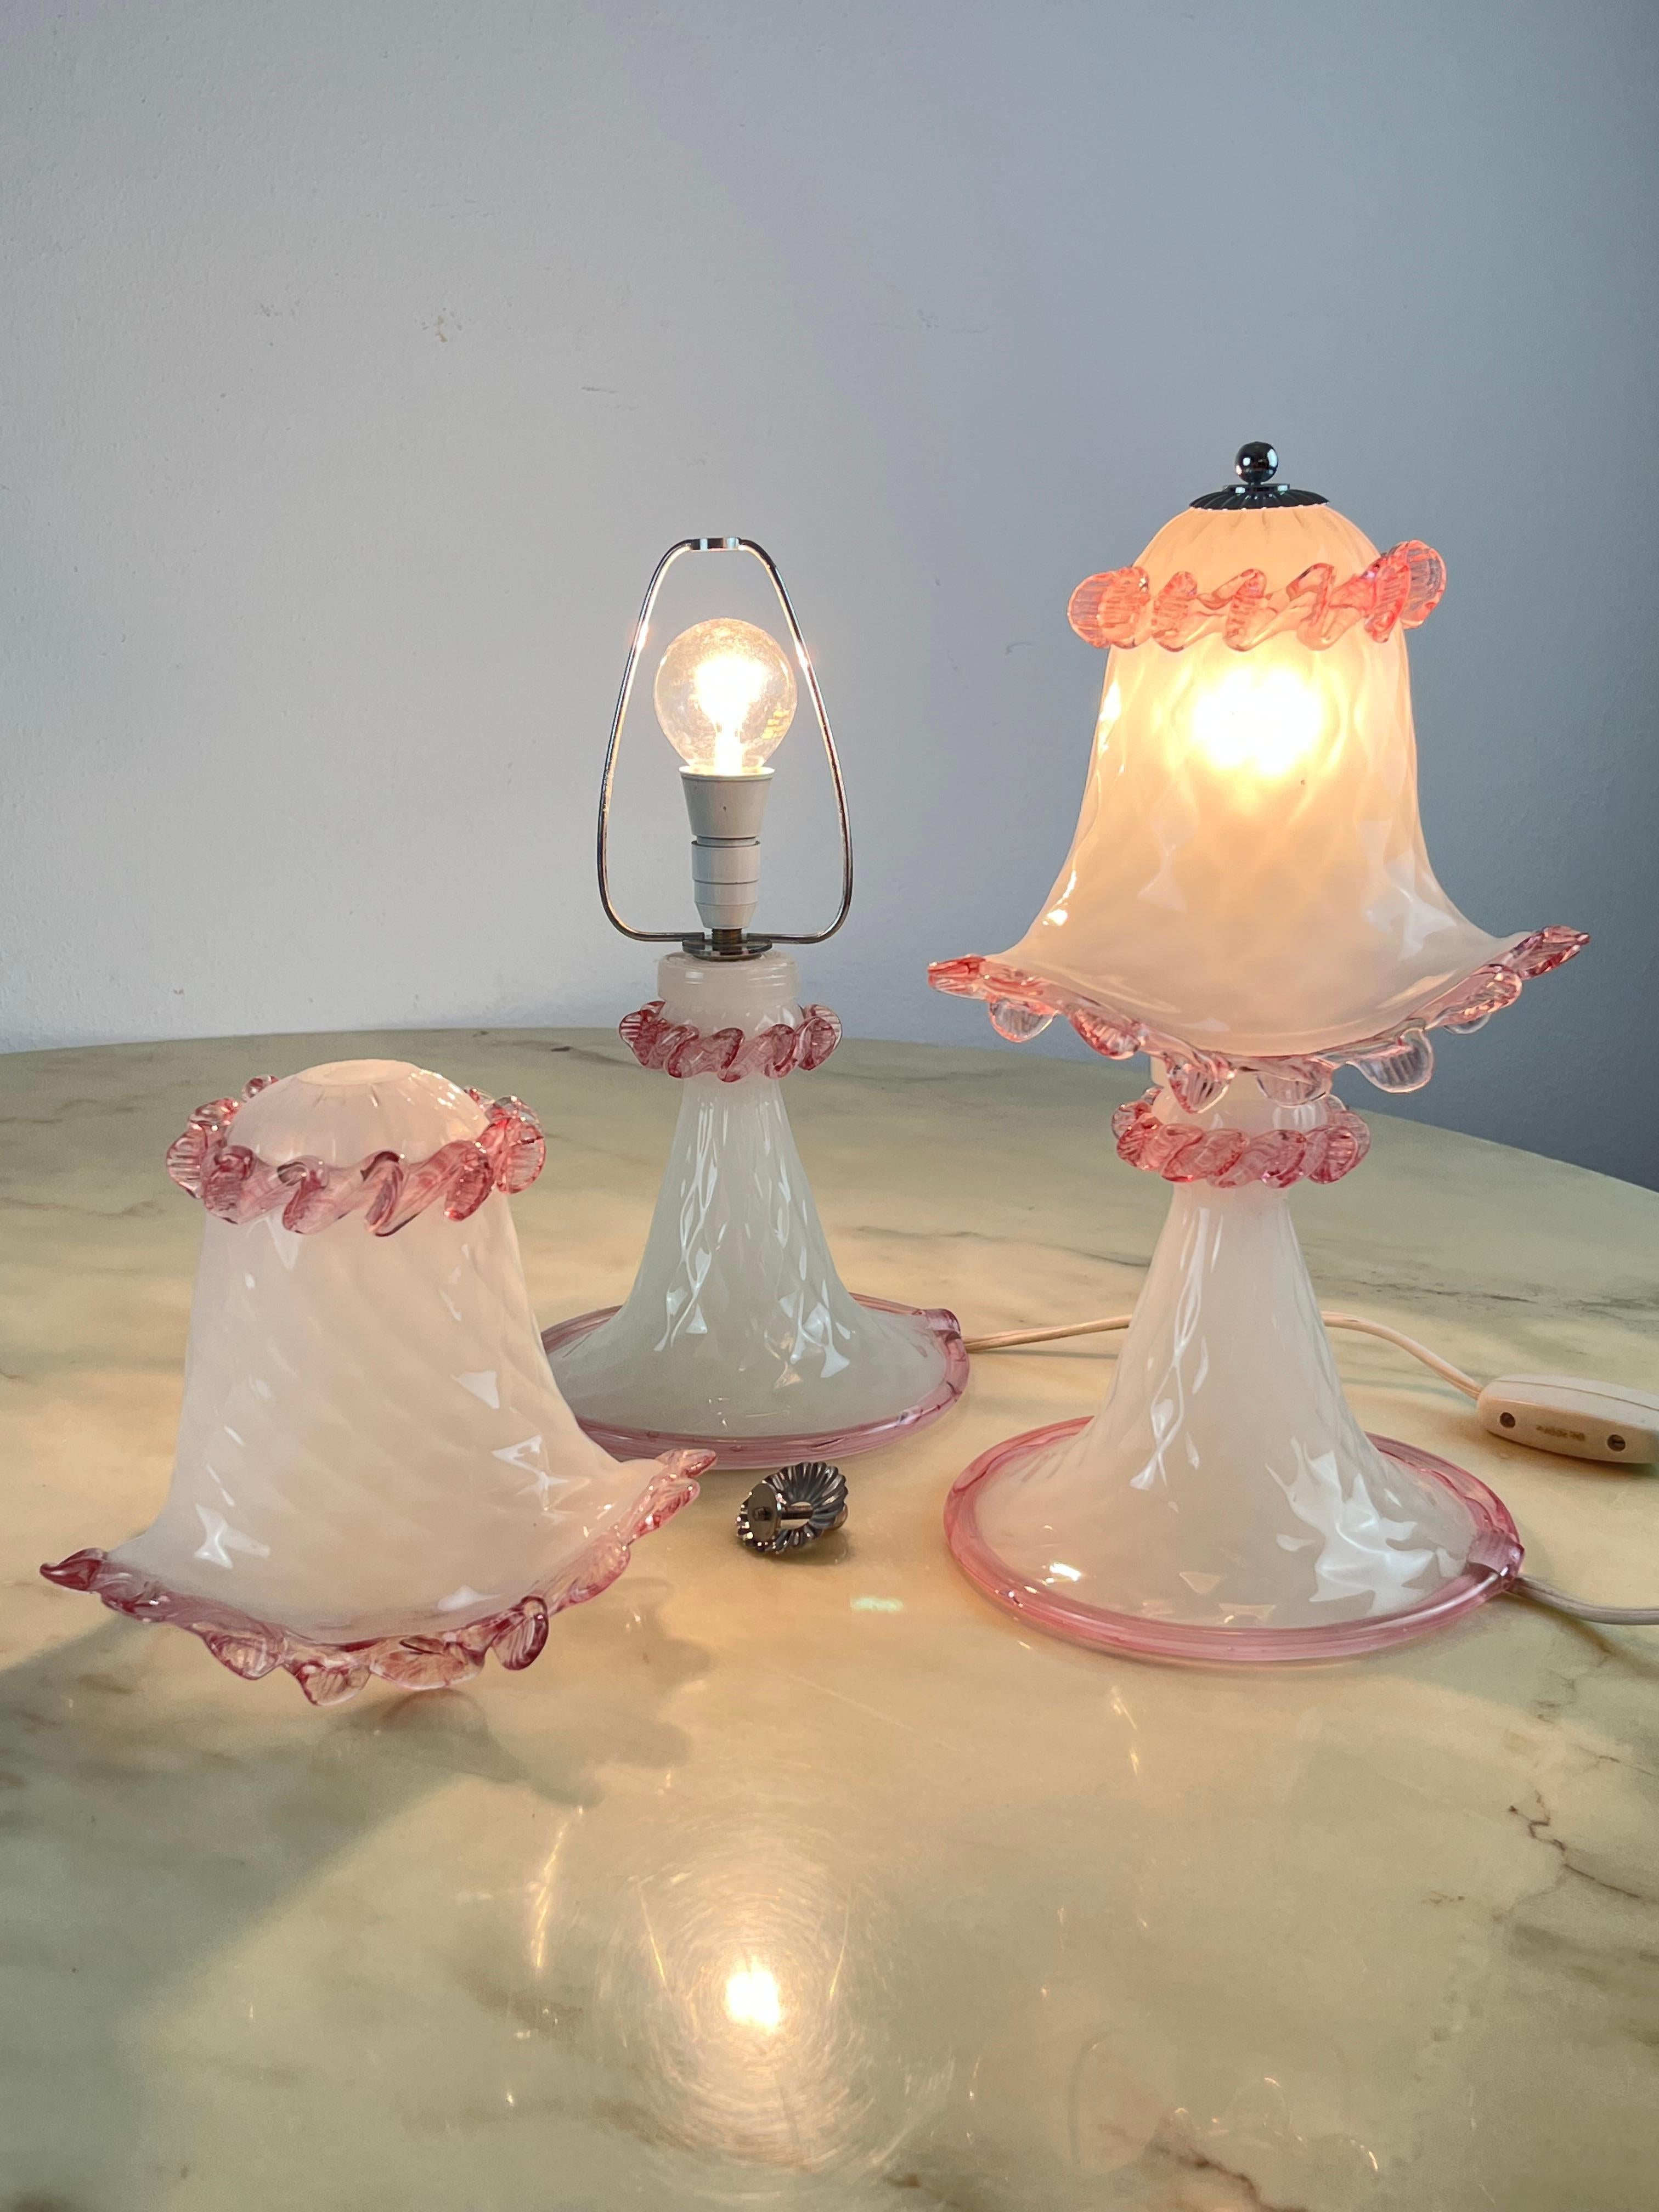 Pair of Murano Glass Bedside Lamps, Italy, 1980s In Good Condition For Sale In Palermo, IT